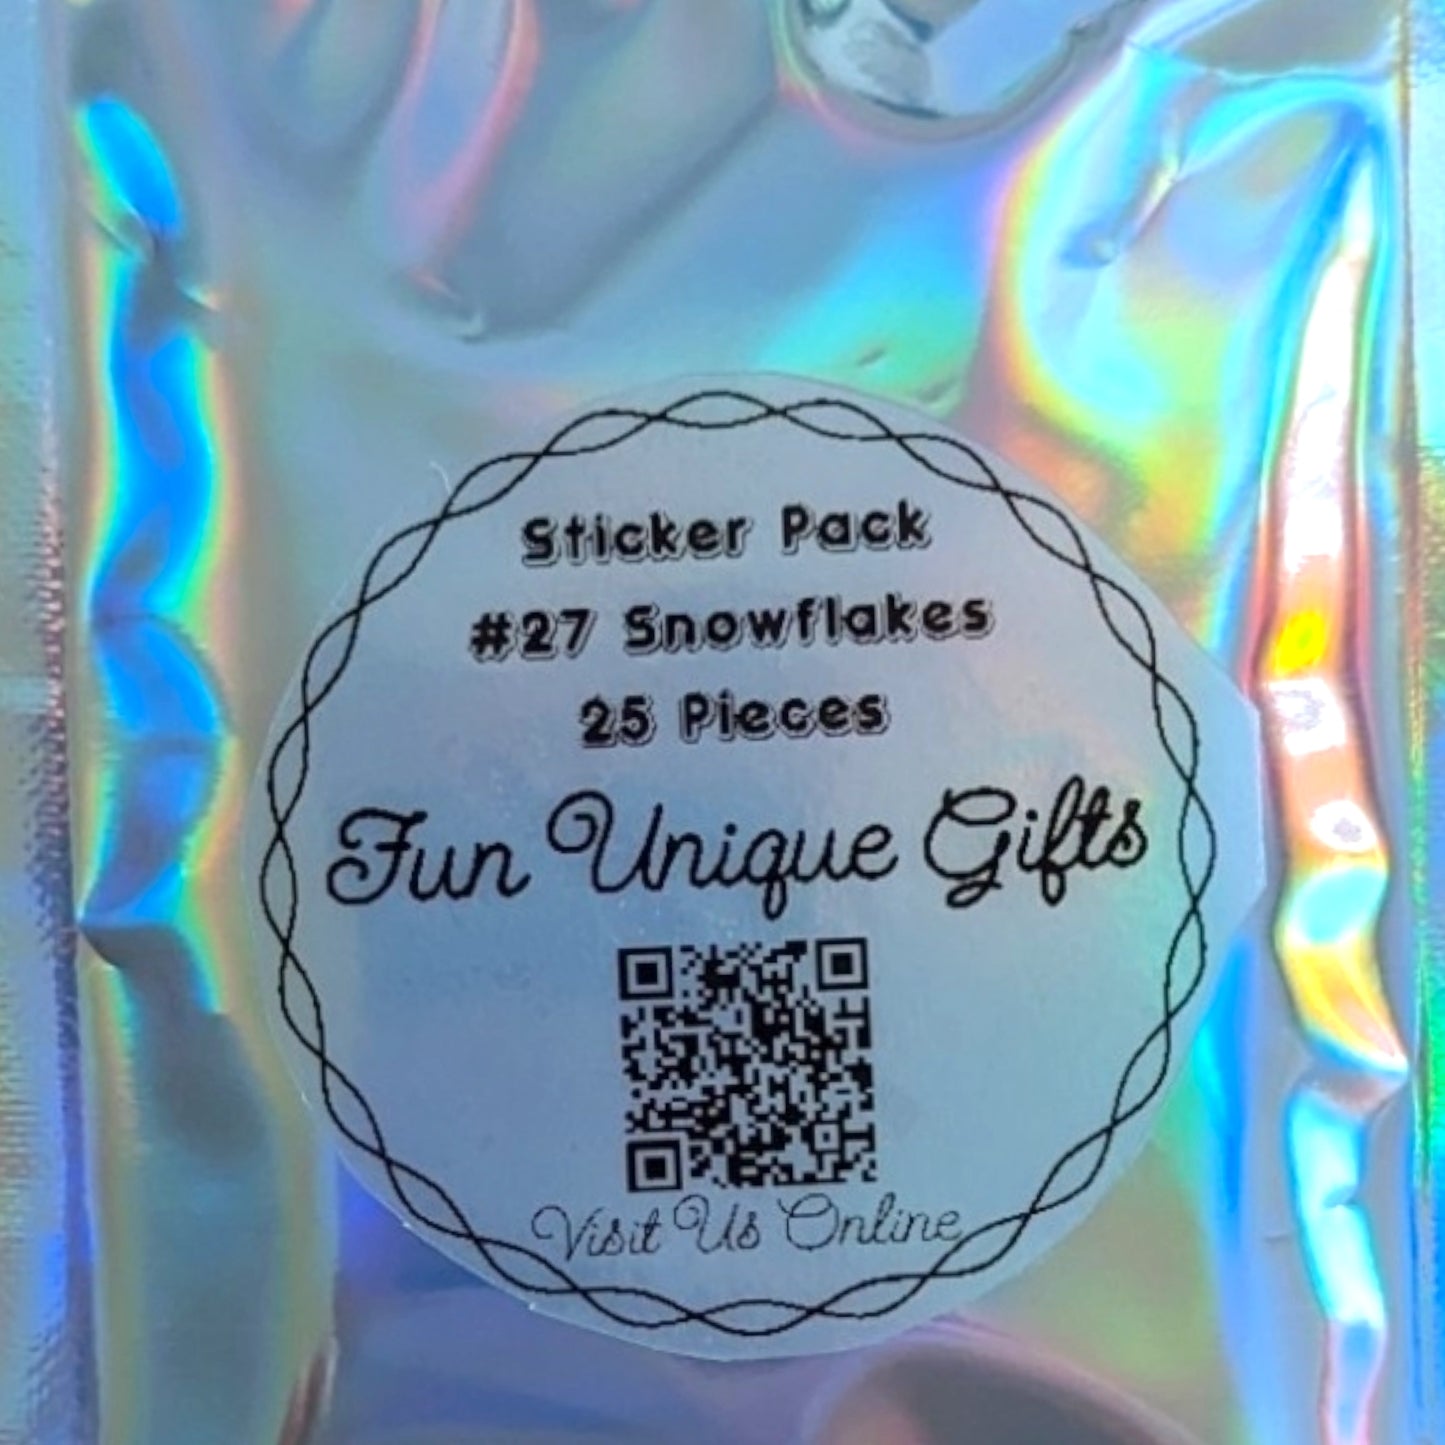 STICKER PACK - Pack #27 - 25 Pieces - Snowflakes